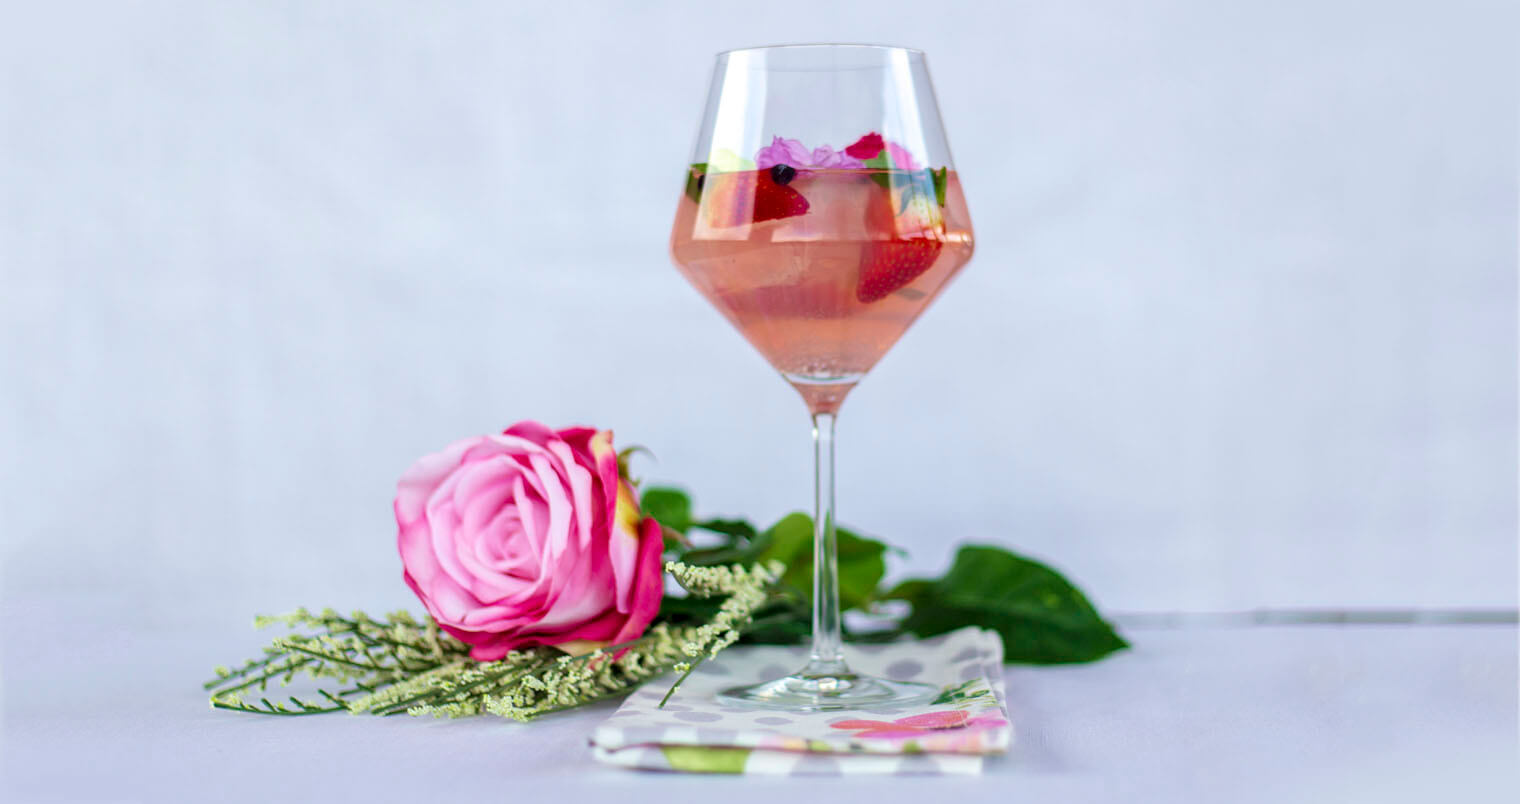 Copper & Kings’ Spanish Rosa Gintonic, featured image